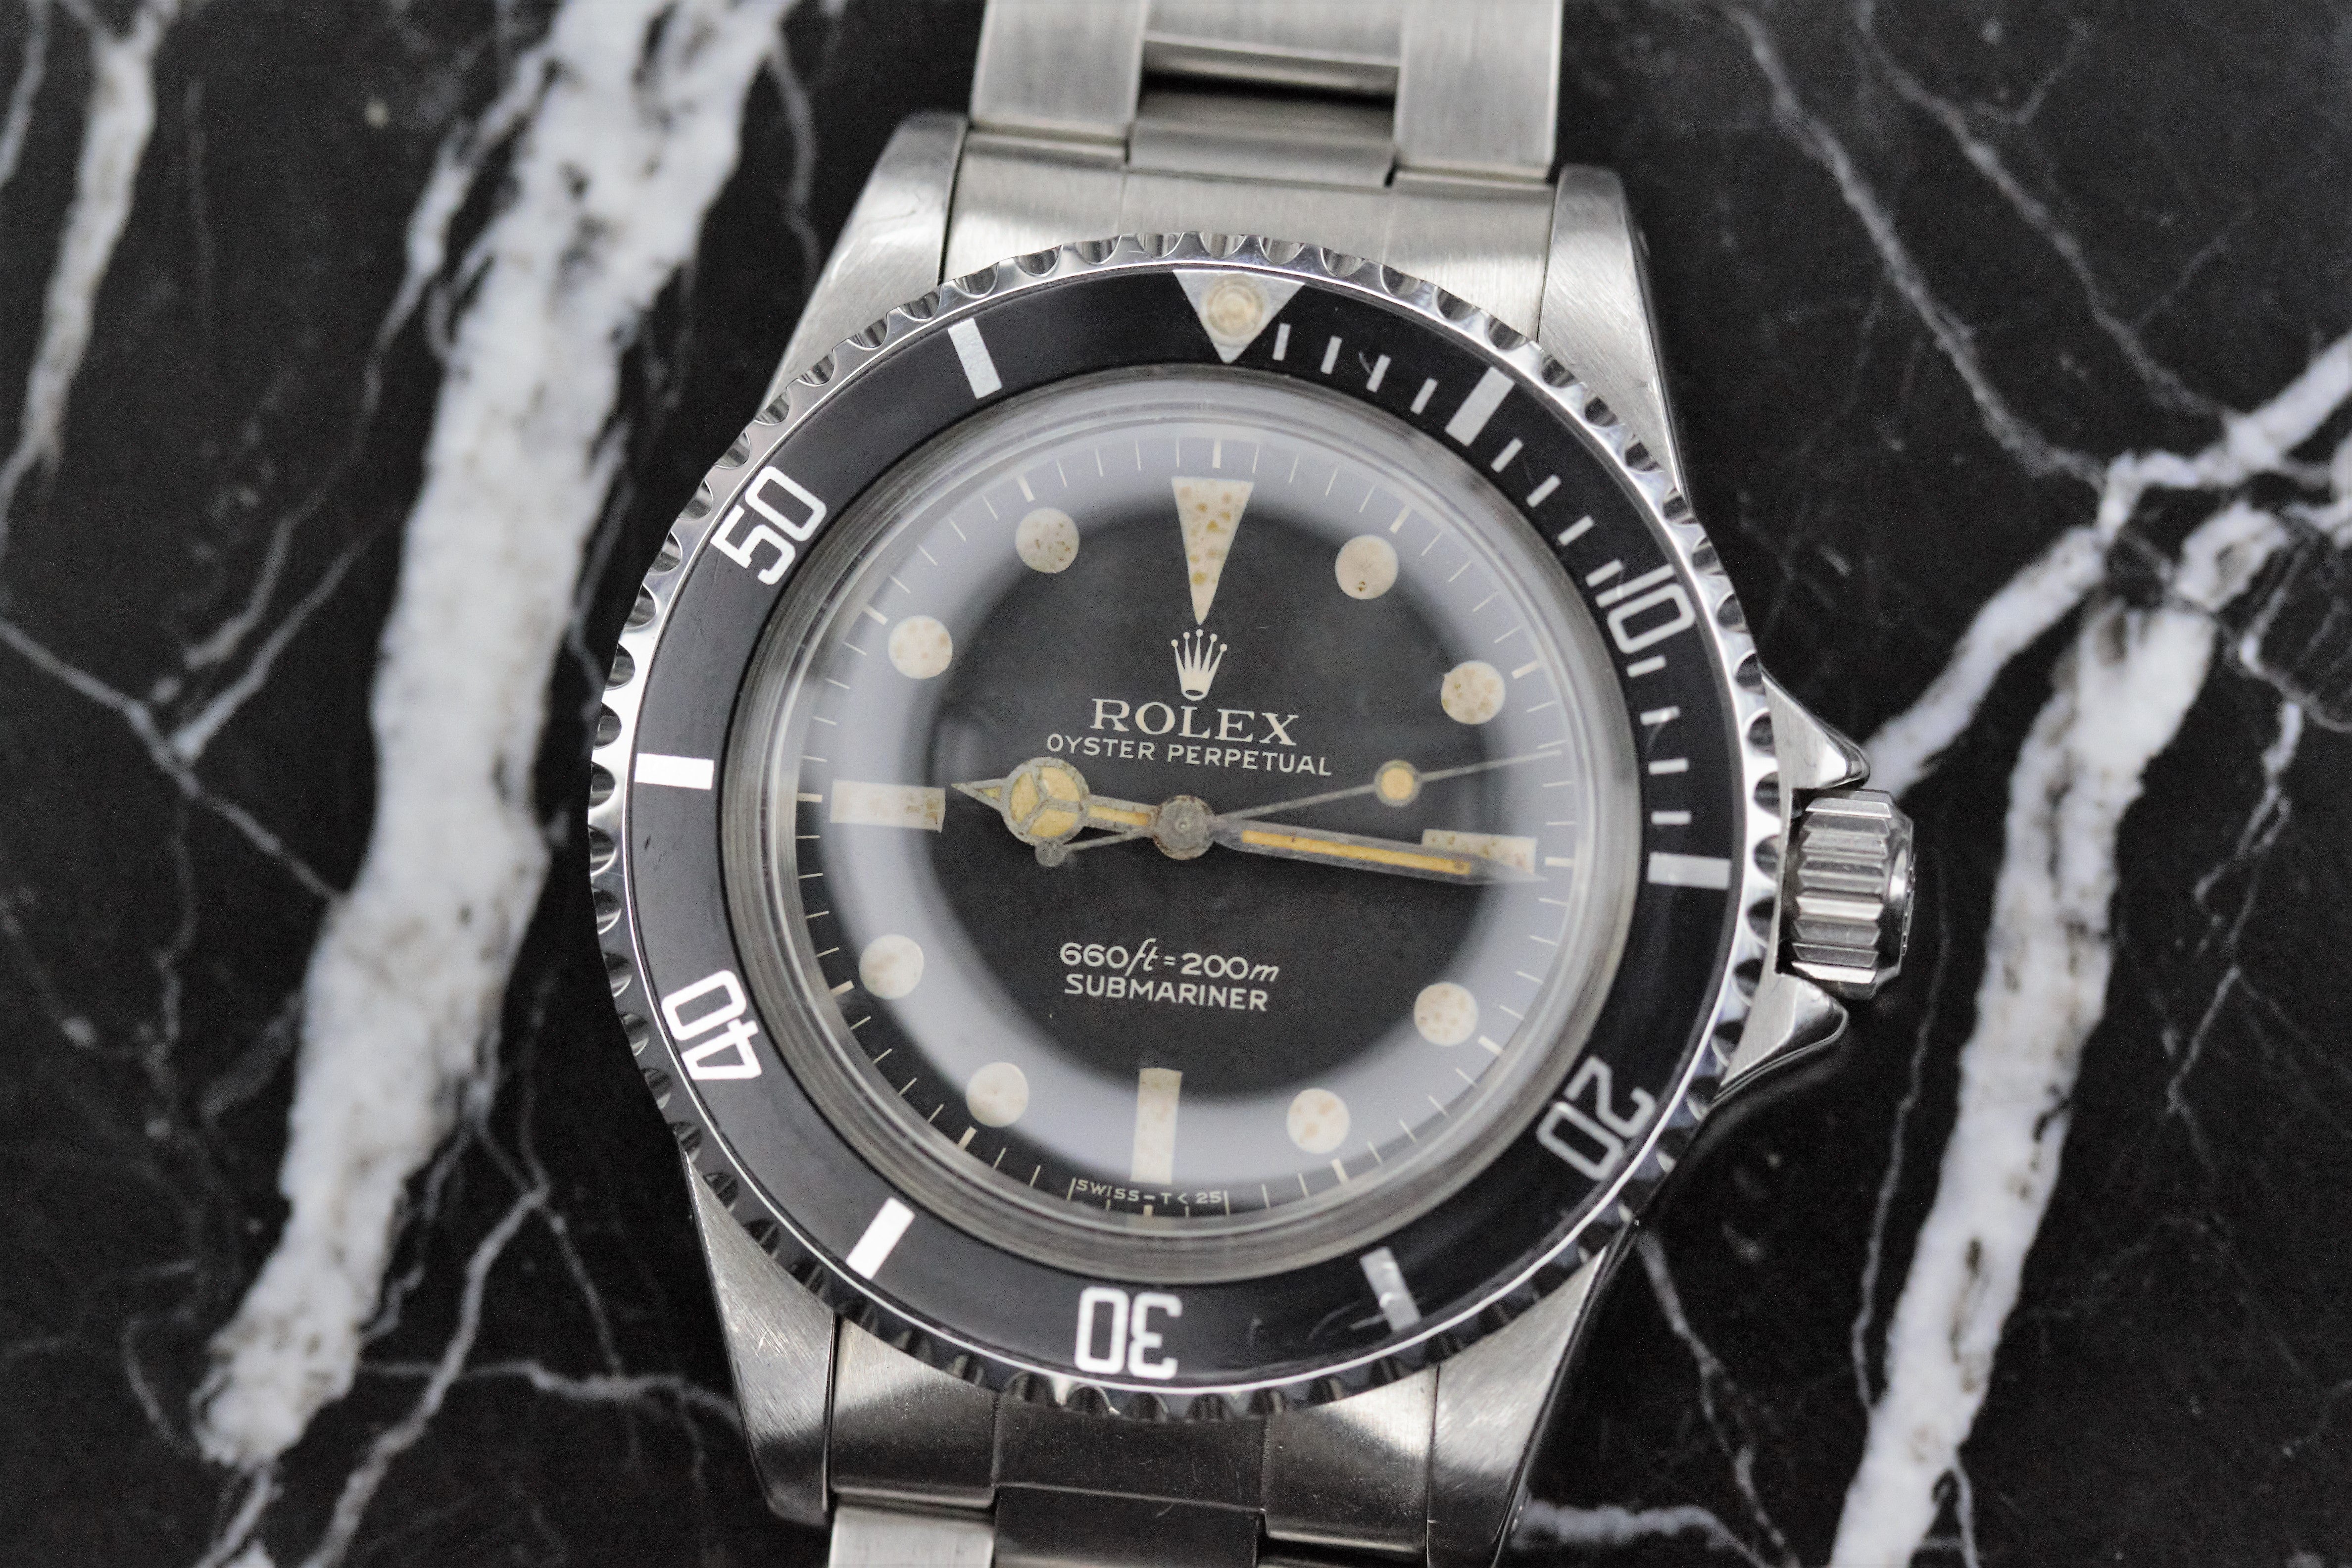 Rolex Oyster Perpetual Submariner Ref.5513 with Maxi Dial MK1